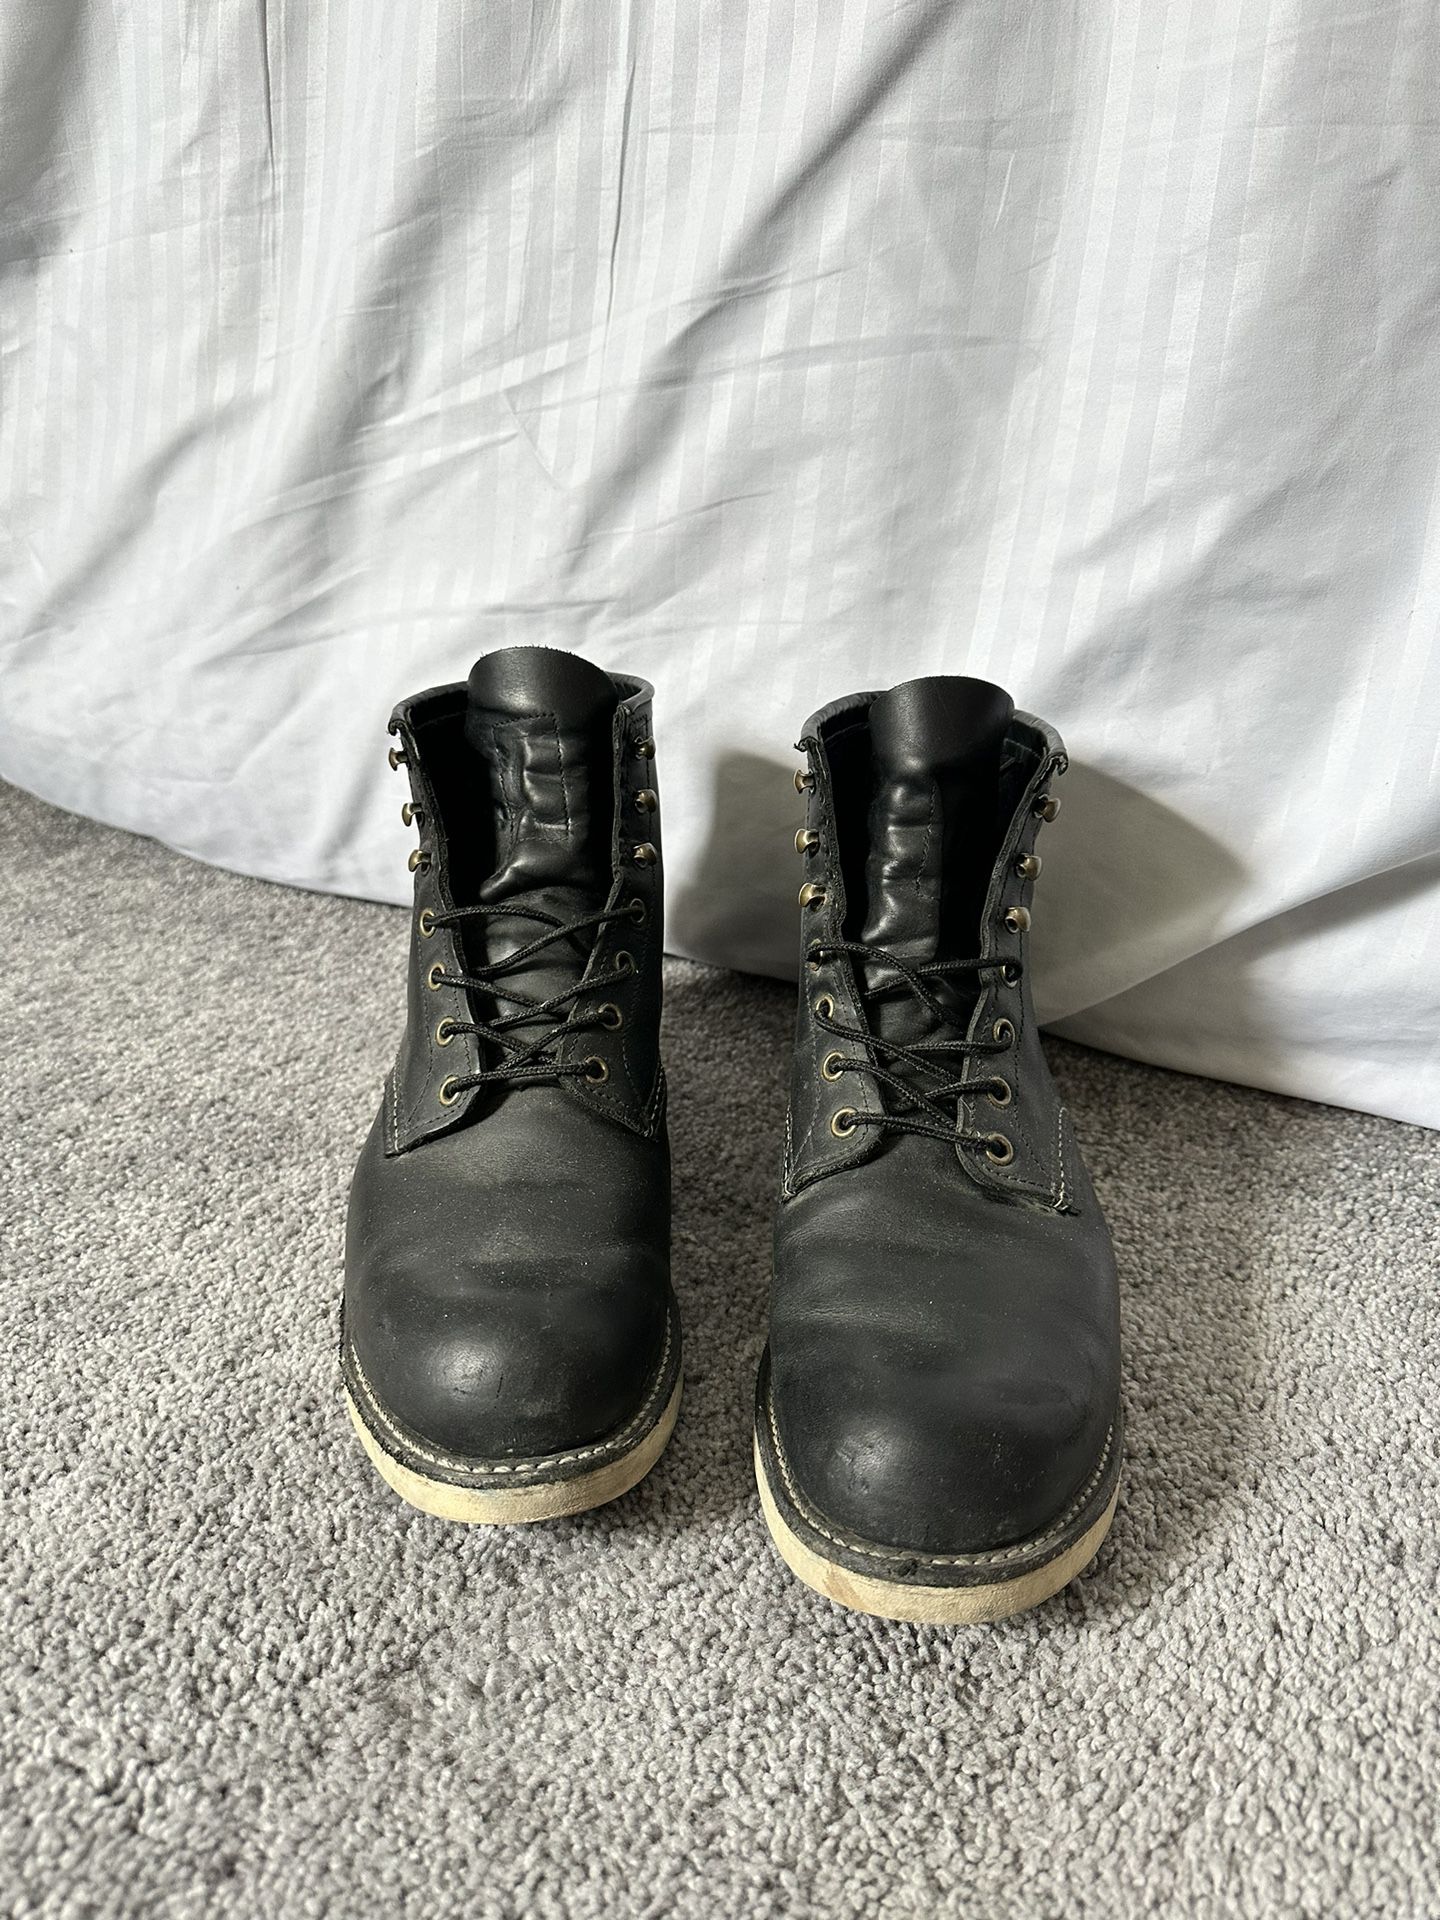 Red Wing Boots - 2951 - Size 10.5